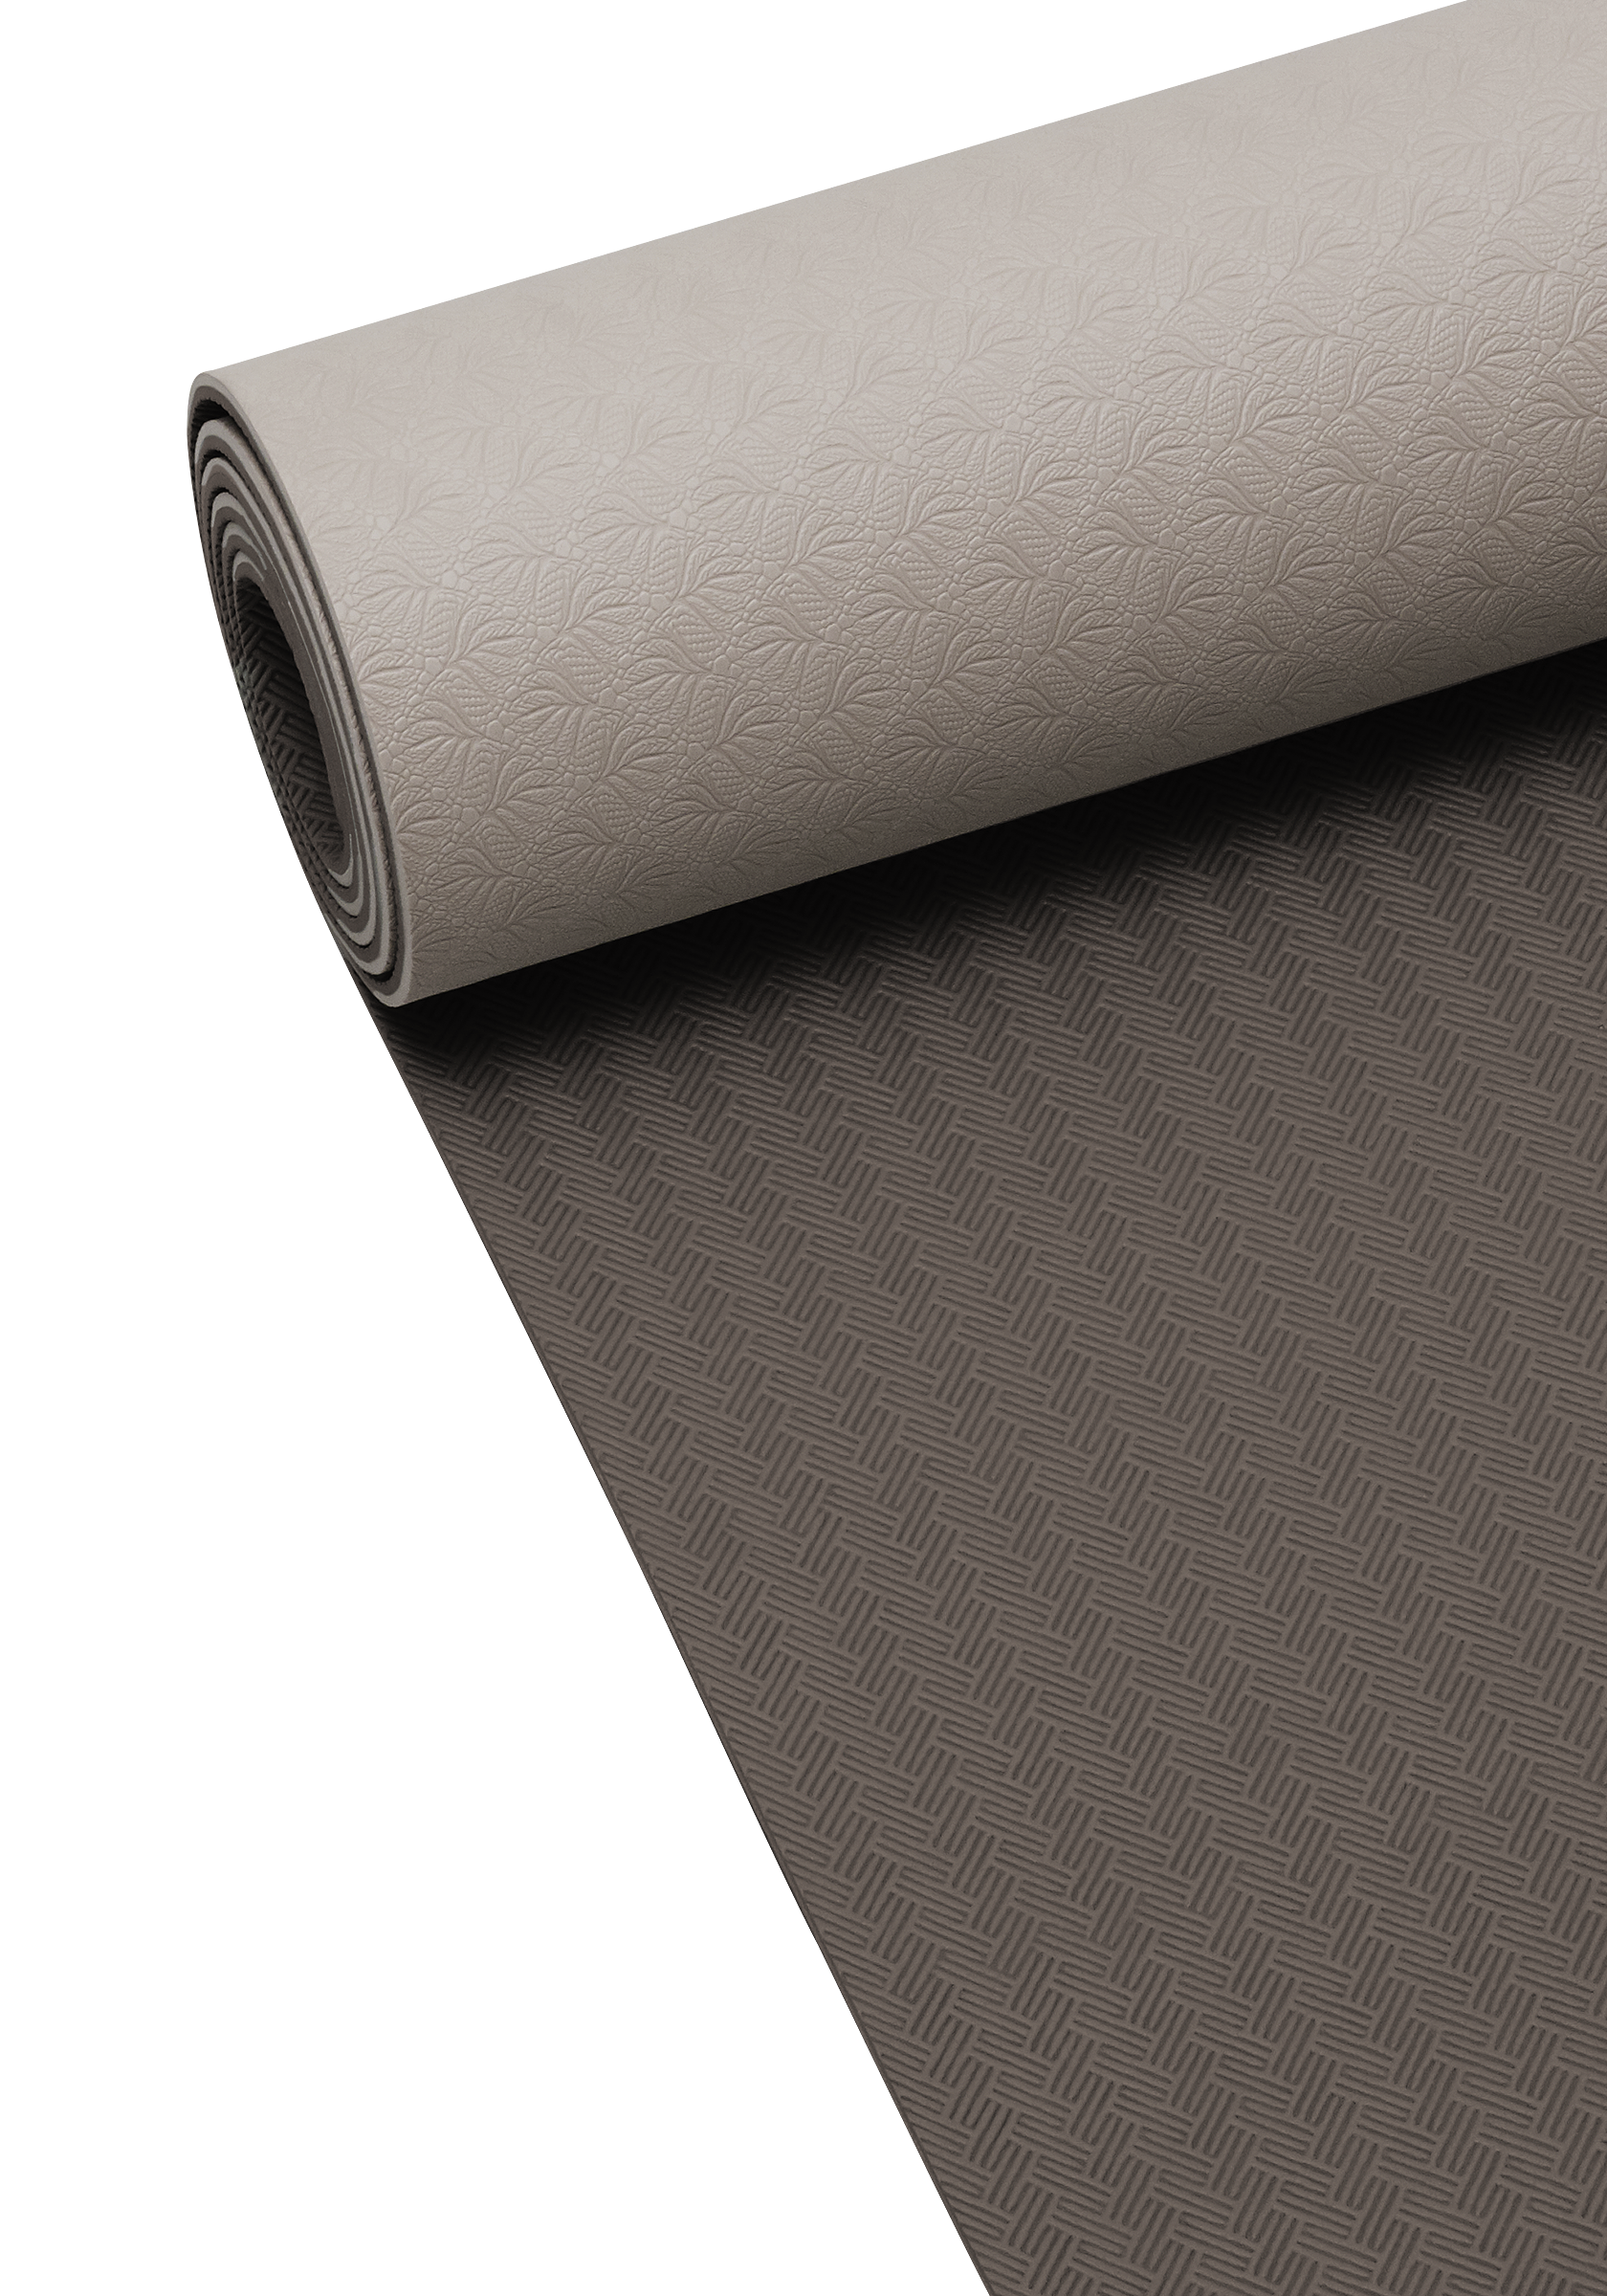 Yoga mat position 4mm - Sand/grounded | CASALL